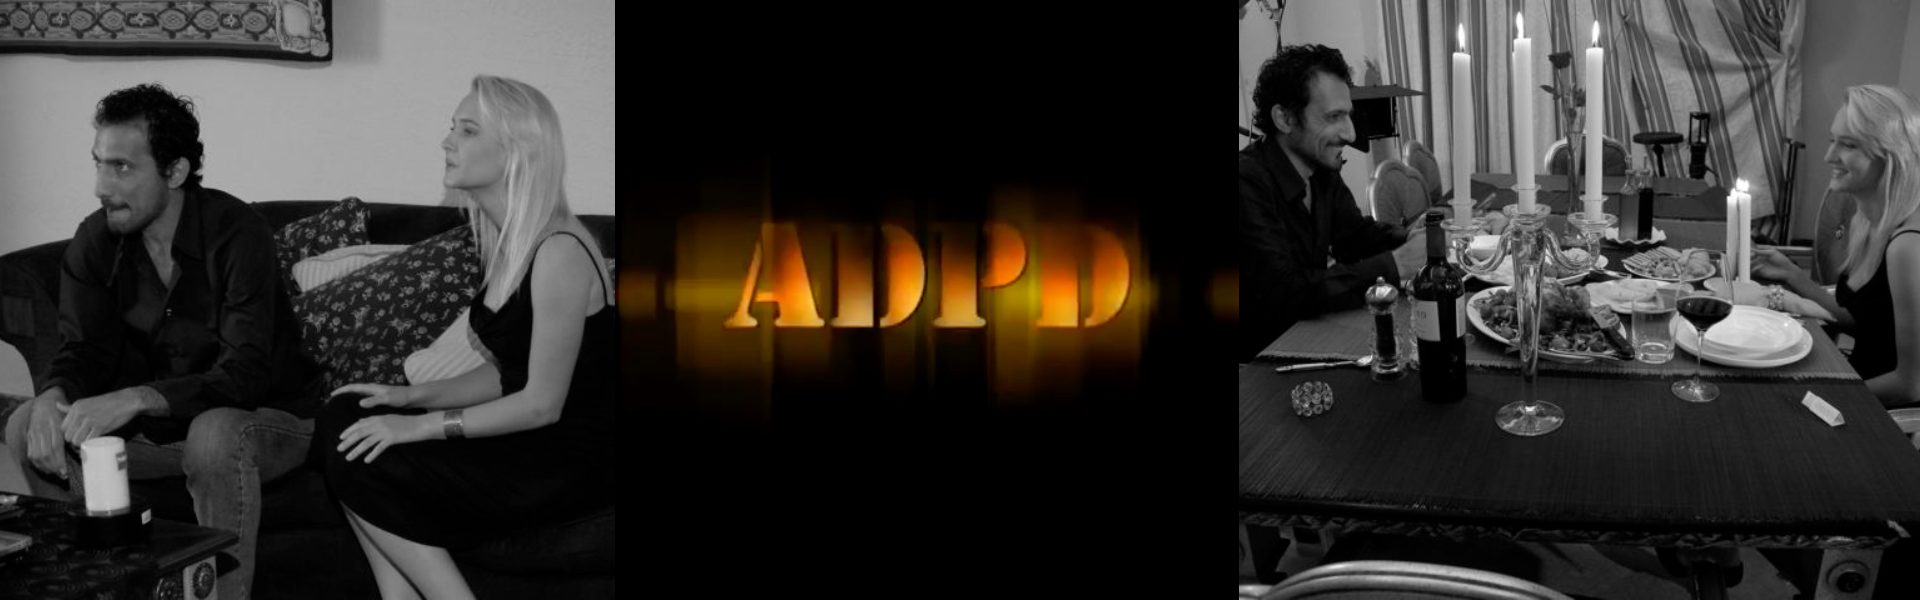 ADPD Page Poster